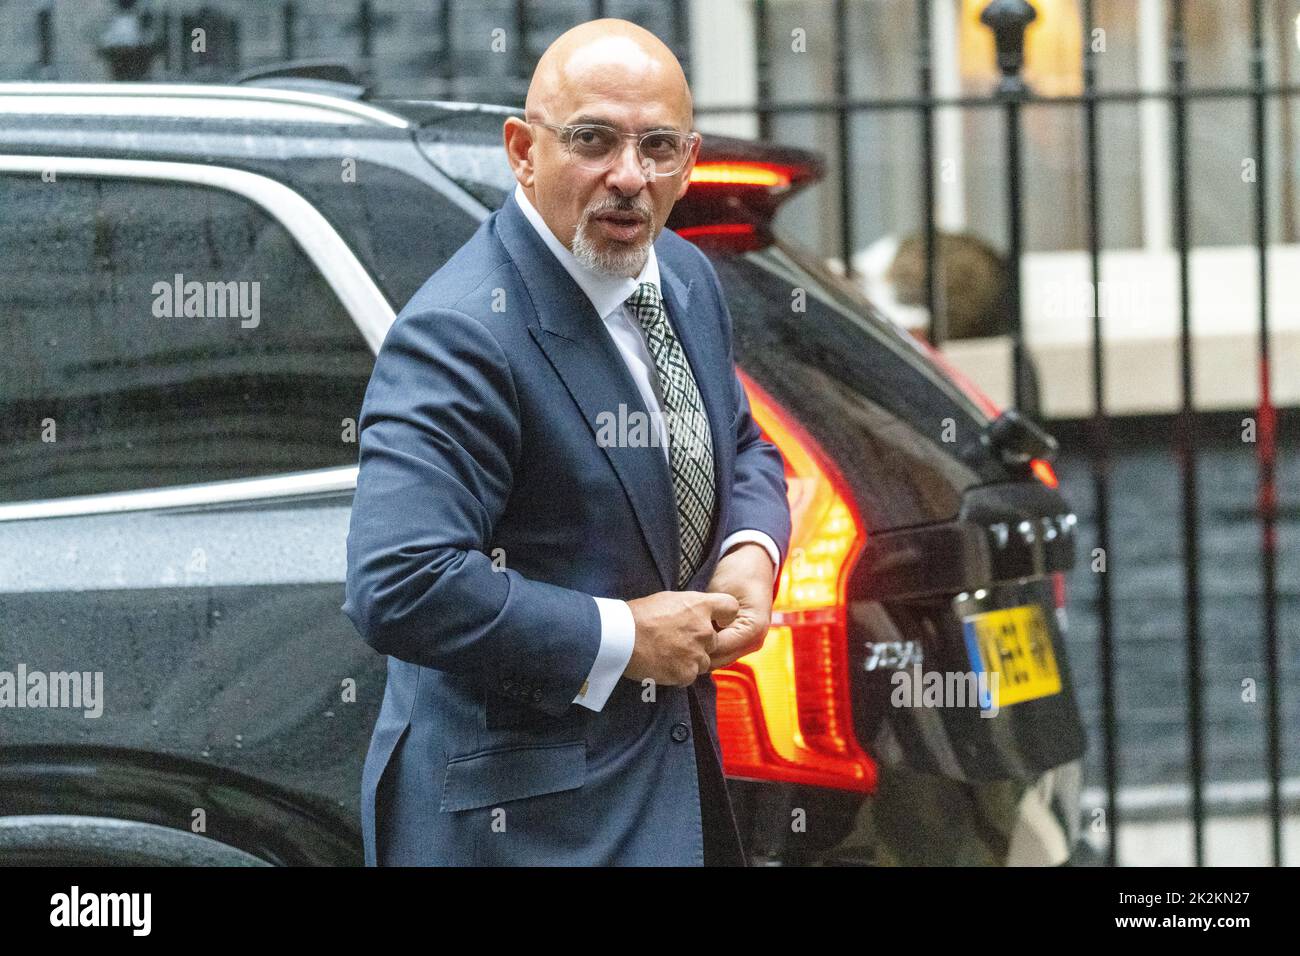 London, UK. 23rd Sep, 2022. Nadhim Zahawi, Chancellor of the Duchy of Lancaster, arrives at a cabinet meeting at 10 Downing Street London. Credit: Ian Davidson/Alamy Live News Stock Photo